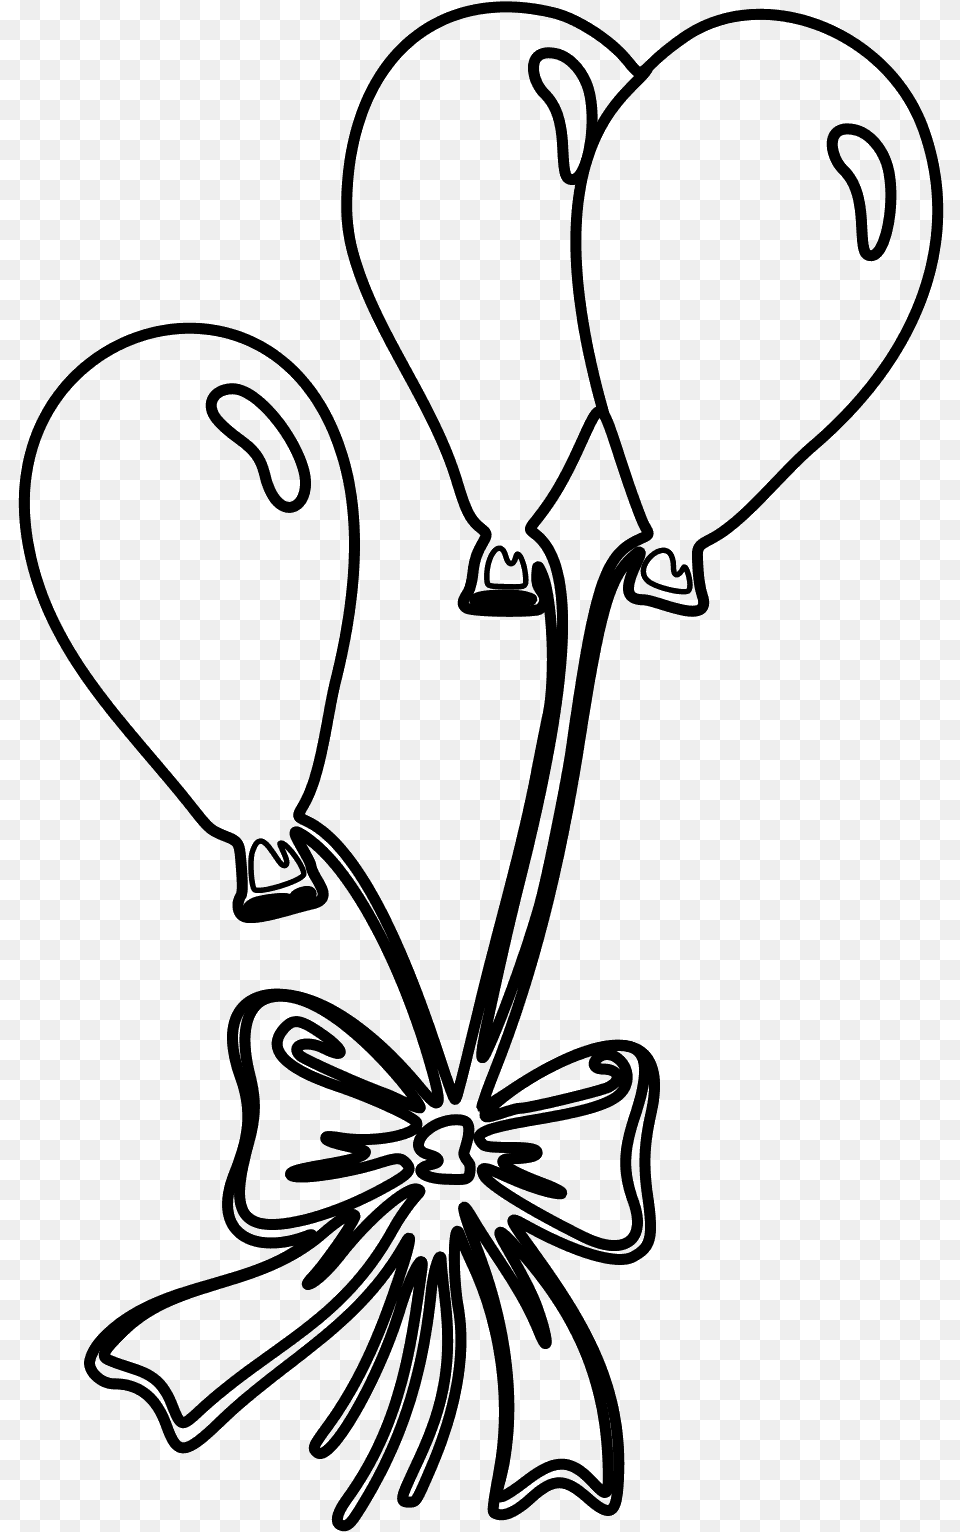 Line Drawing Of Balloons Balloon Coloring Pages, Stencil, Accessories, Jewelry, Necklace Free Png Download